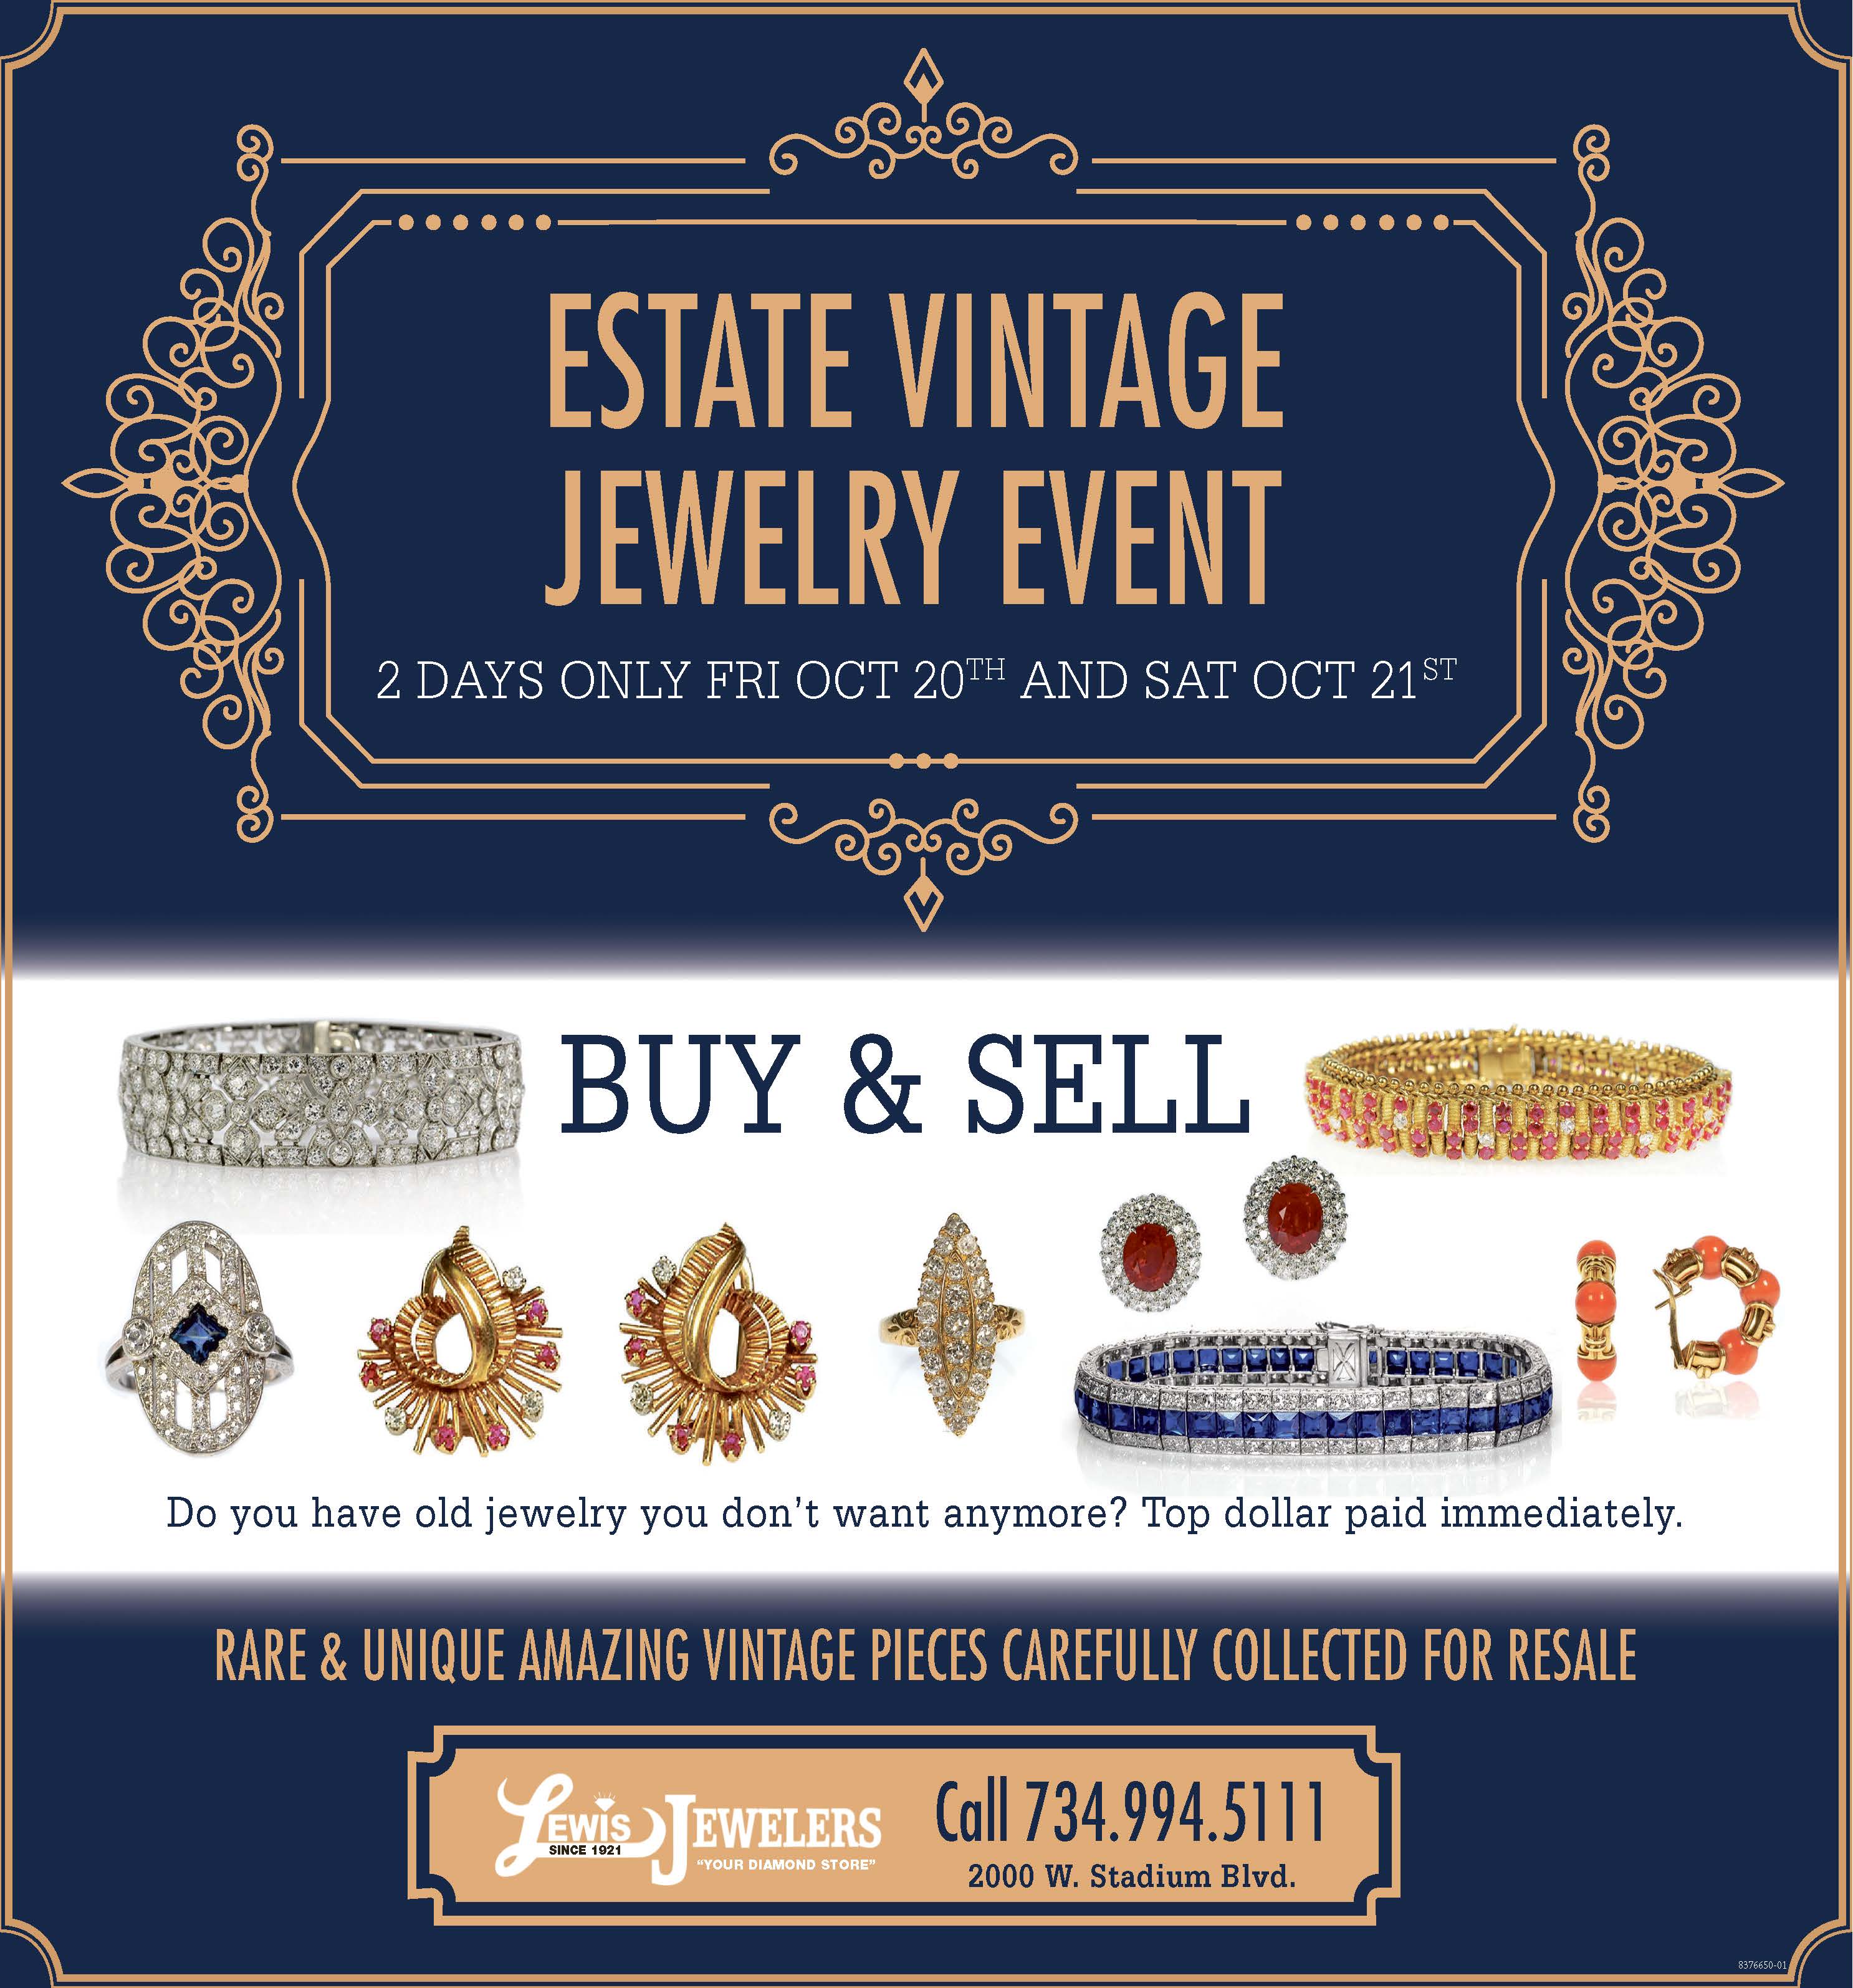 ​Ann Arbor Fine Jewelry Retailer Lewis Jewelers Announces Vintage and Estate Jewelry Sales Event